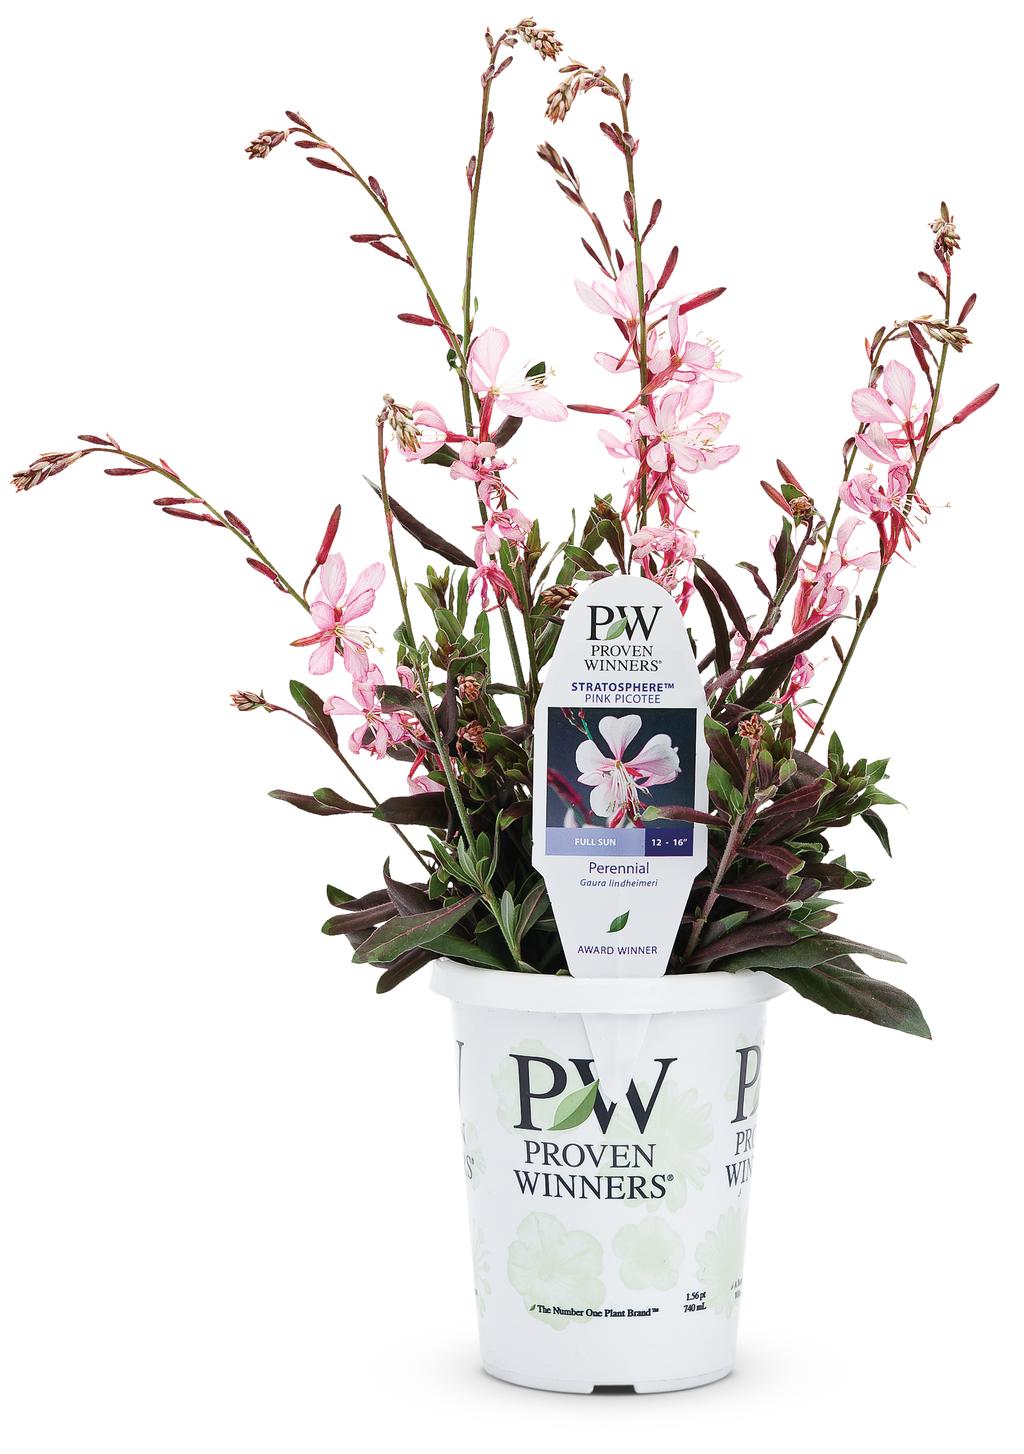 Butterfly Flower (Gaura) - Pink Picotee (PW)